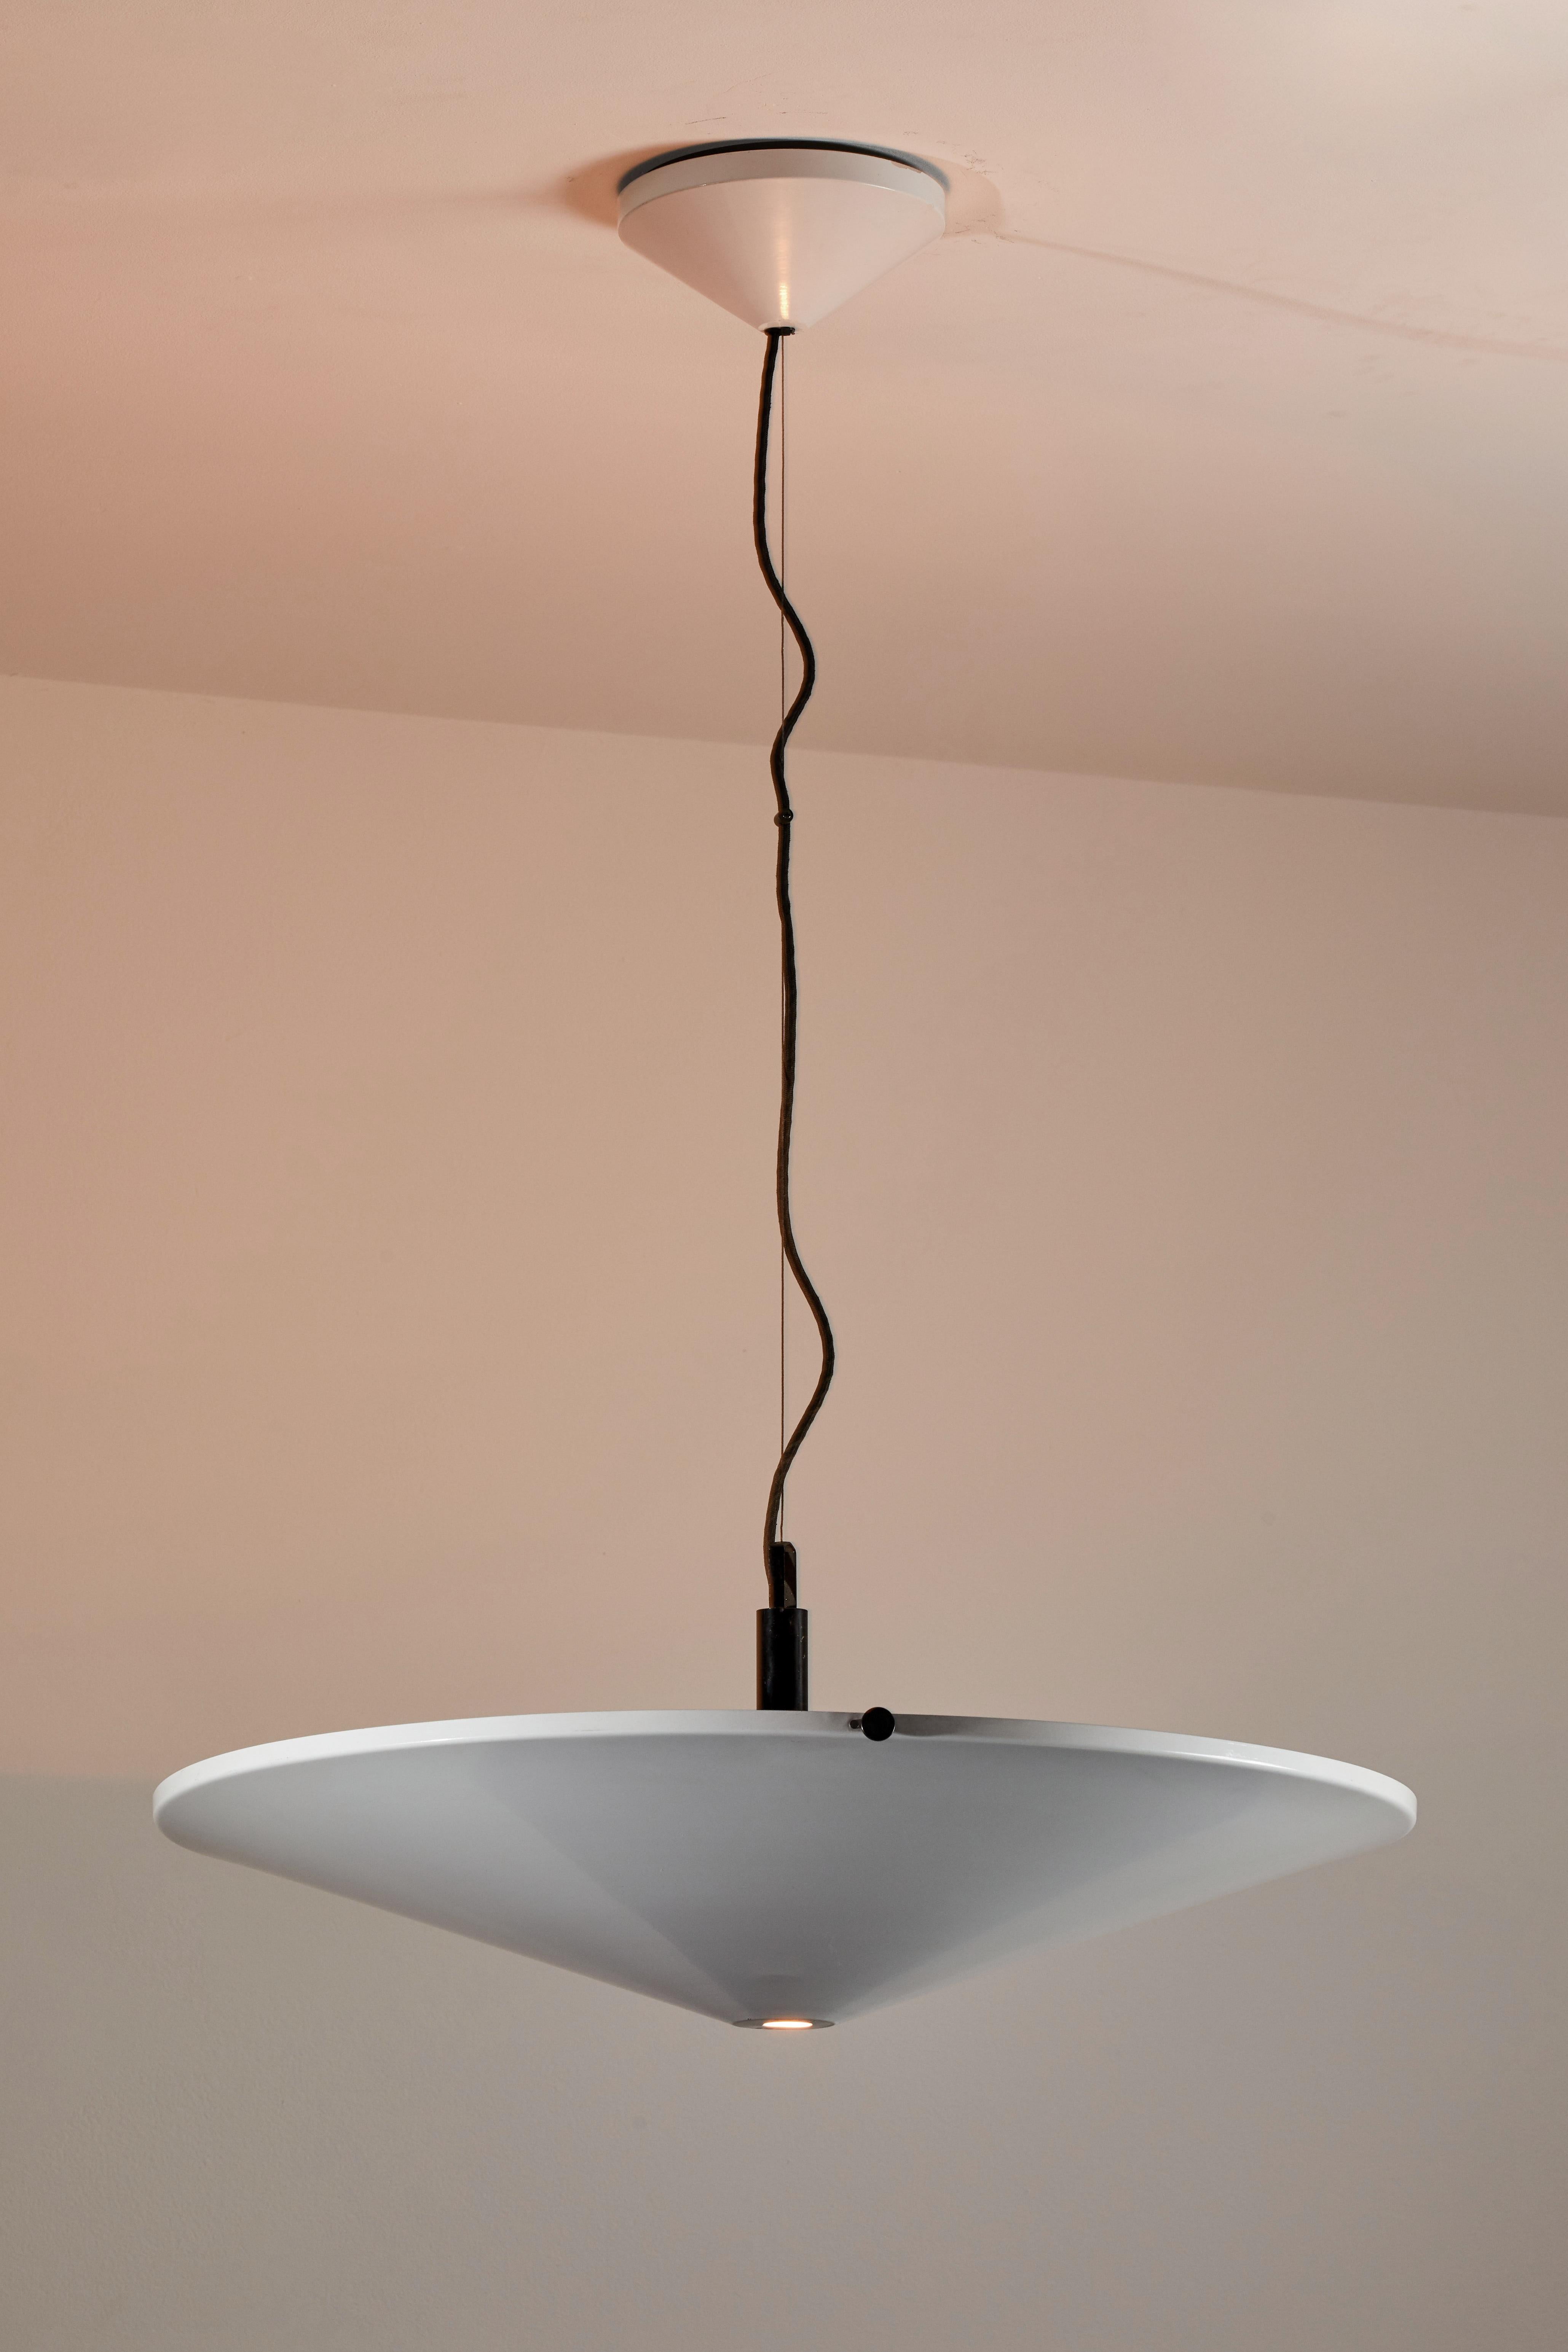 Suspension light by Arteluce. Manufactured in Italy, circa 1970s. Enameled metal. Rewired for U.S. junction boxes. Takes one Halogen 200w maximum bulb. Bulb provided as a one time courtesy.